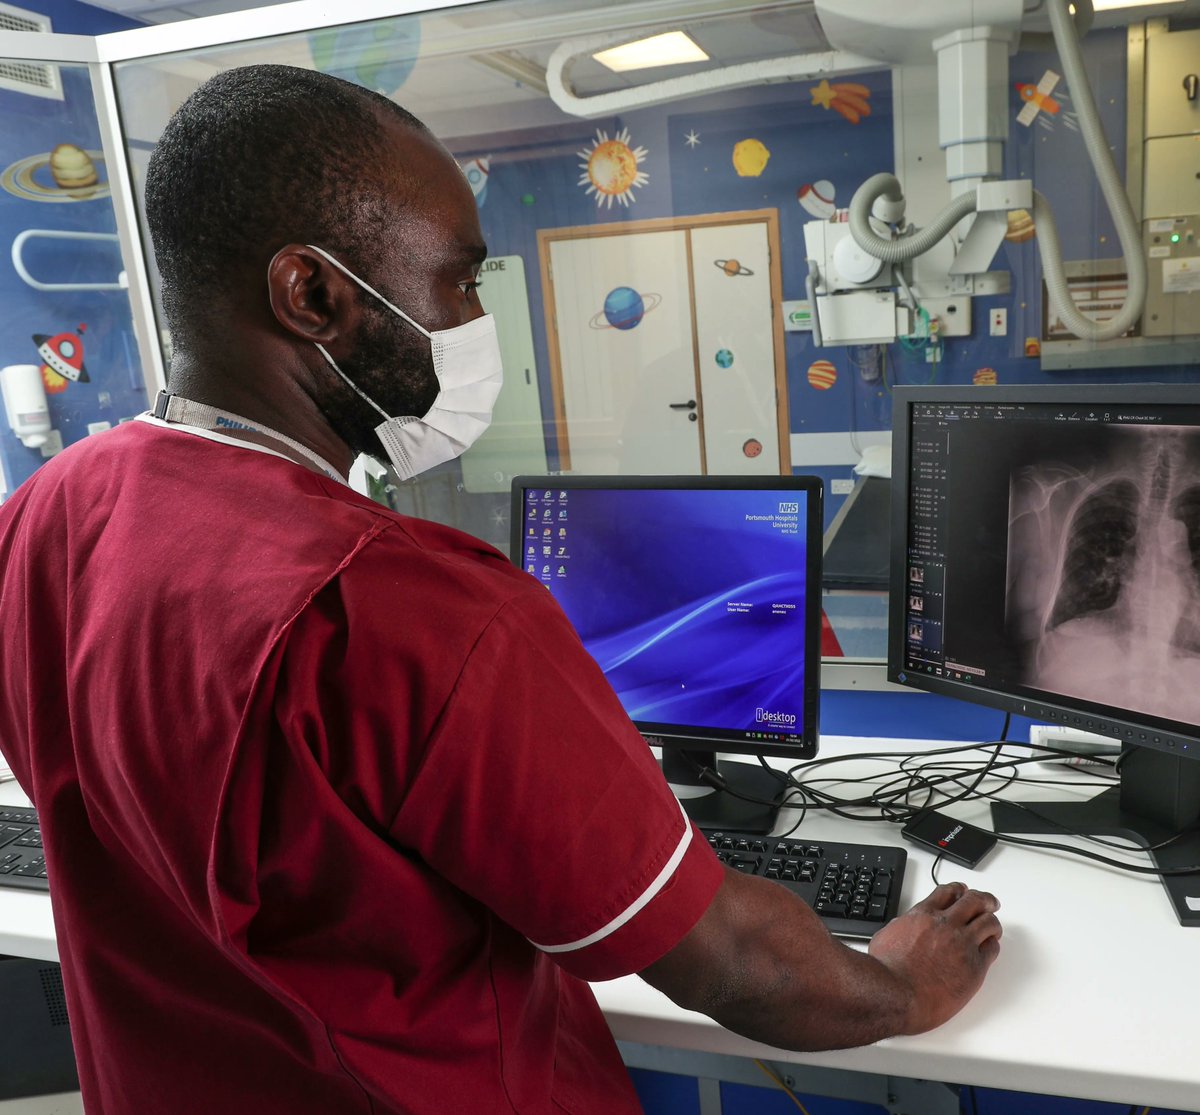 PHU are looking to expand the Radiography Team and are recruiting Band 5 Radiographers, with a passion for plain film. An excellent opportunity to welcome student radiographers who are due to qualify in spring/summer 2021 to join our family! buff.ly/3c4nOBD